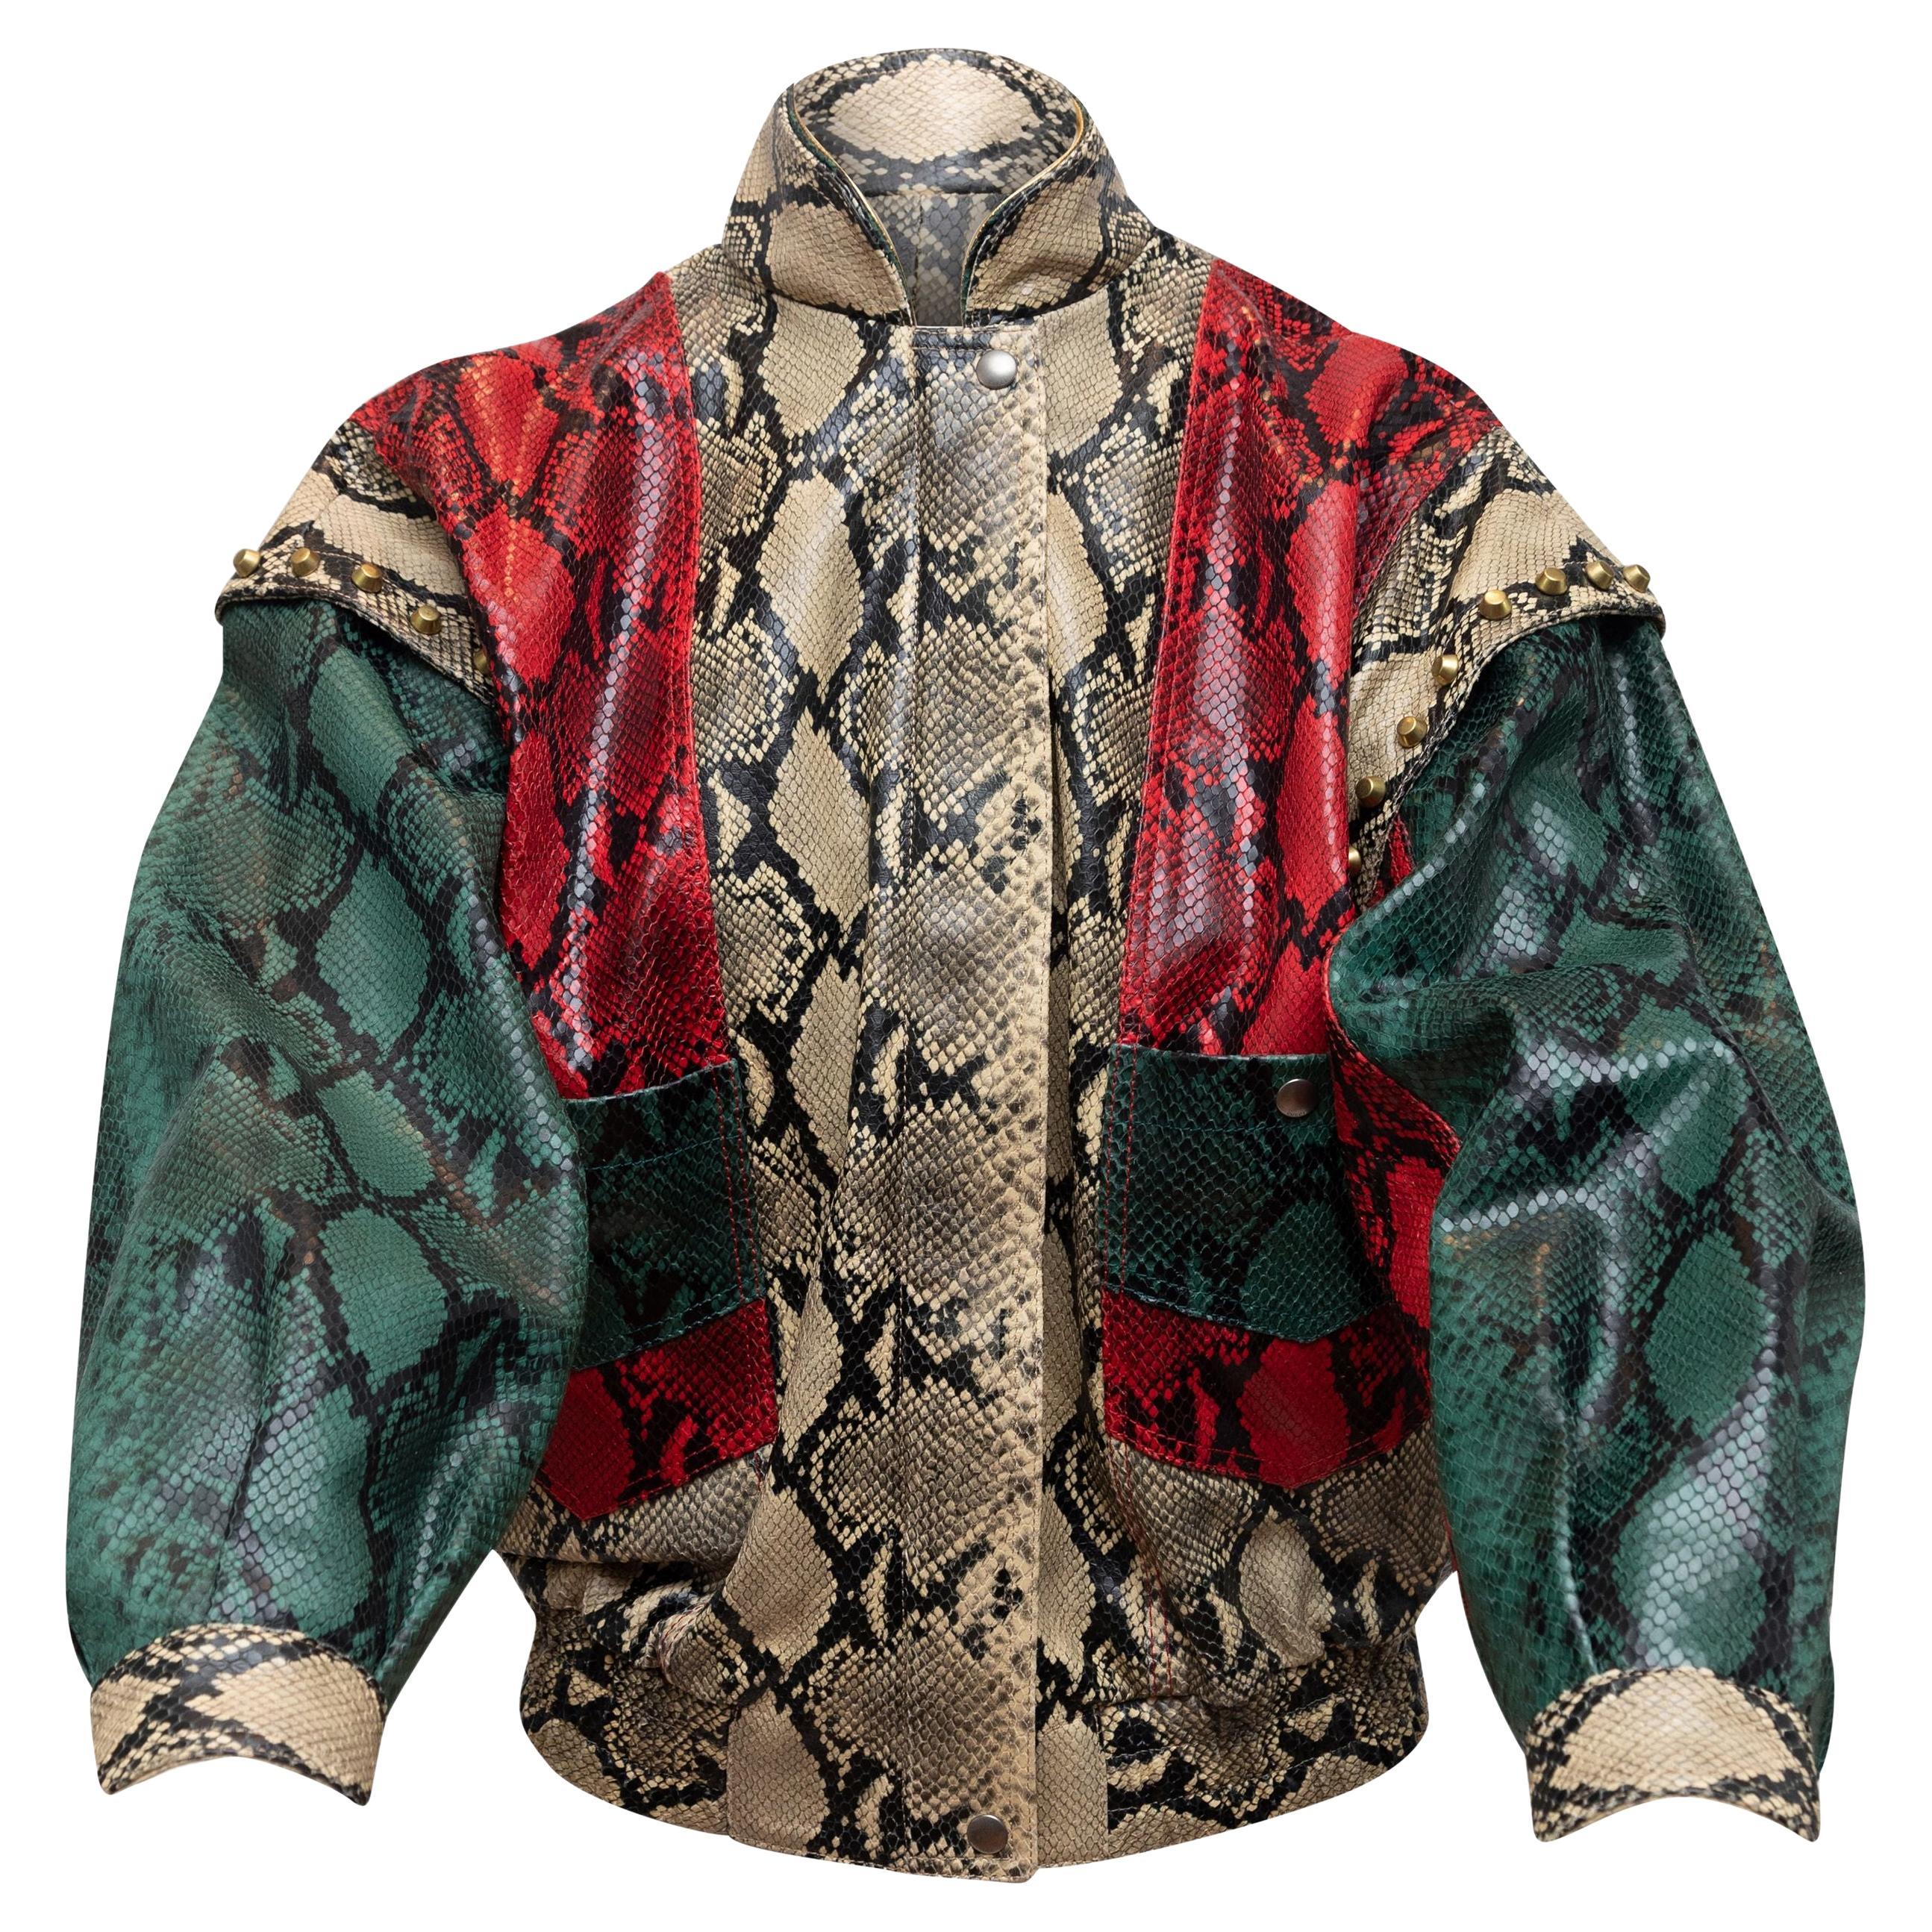 Gucci Tan & Multicolor Python Printed Leather Bomber Jacket